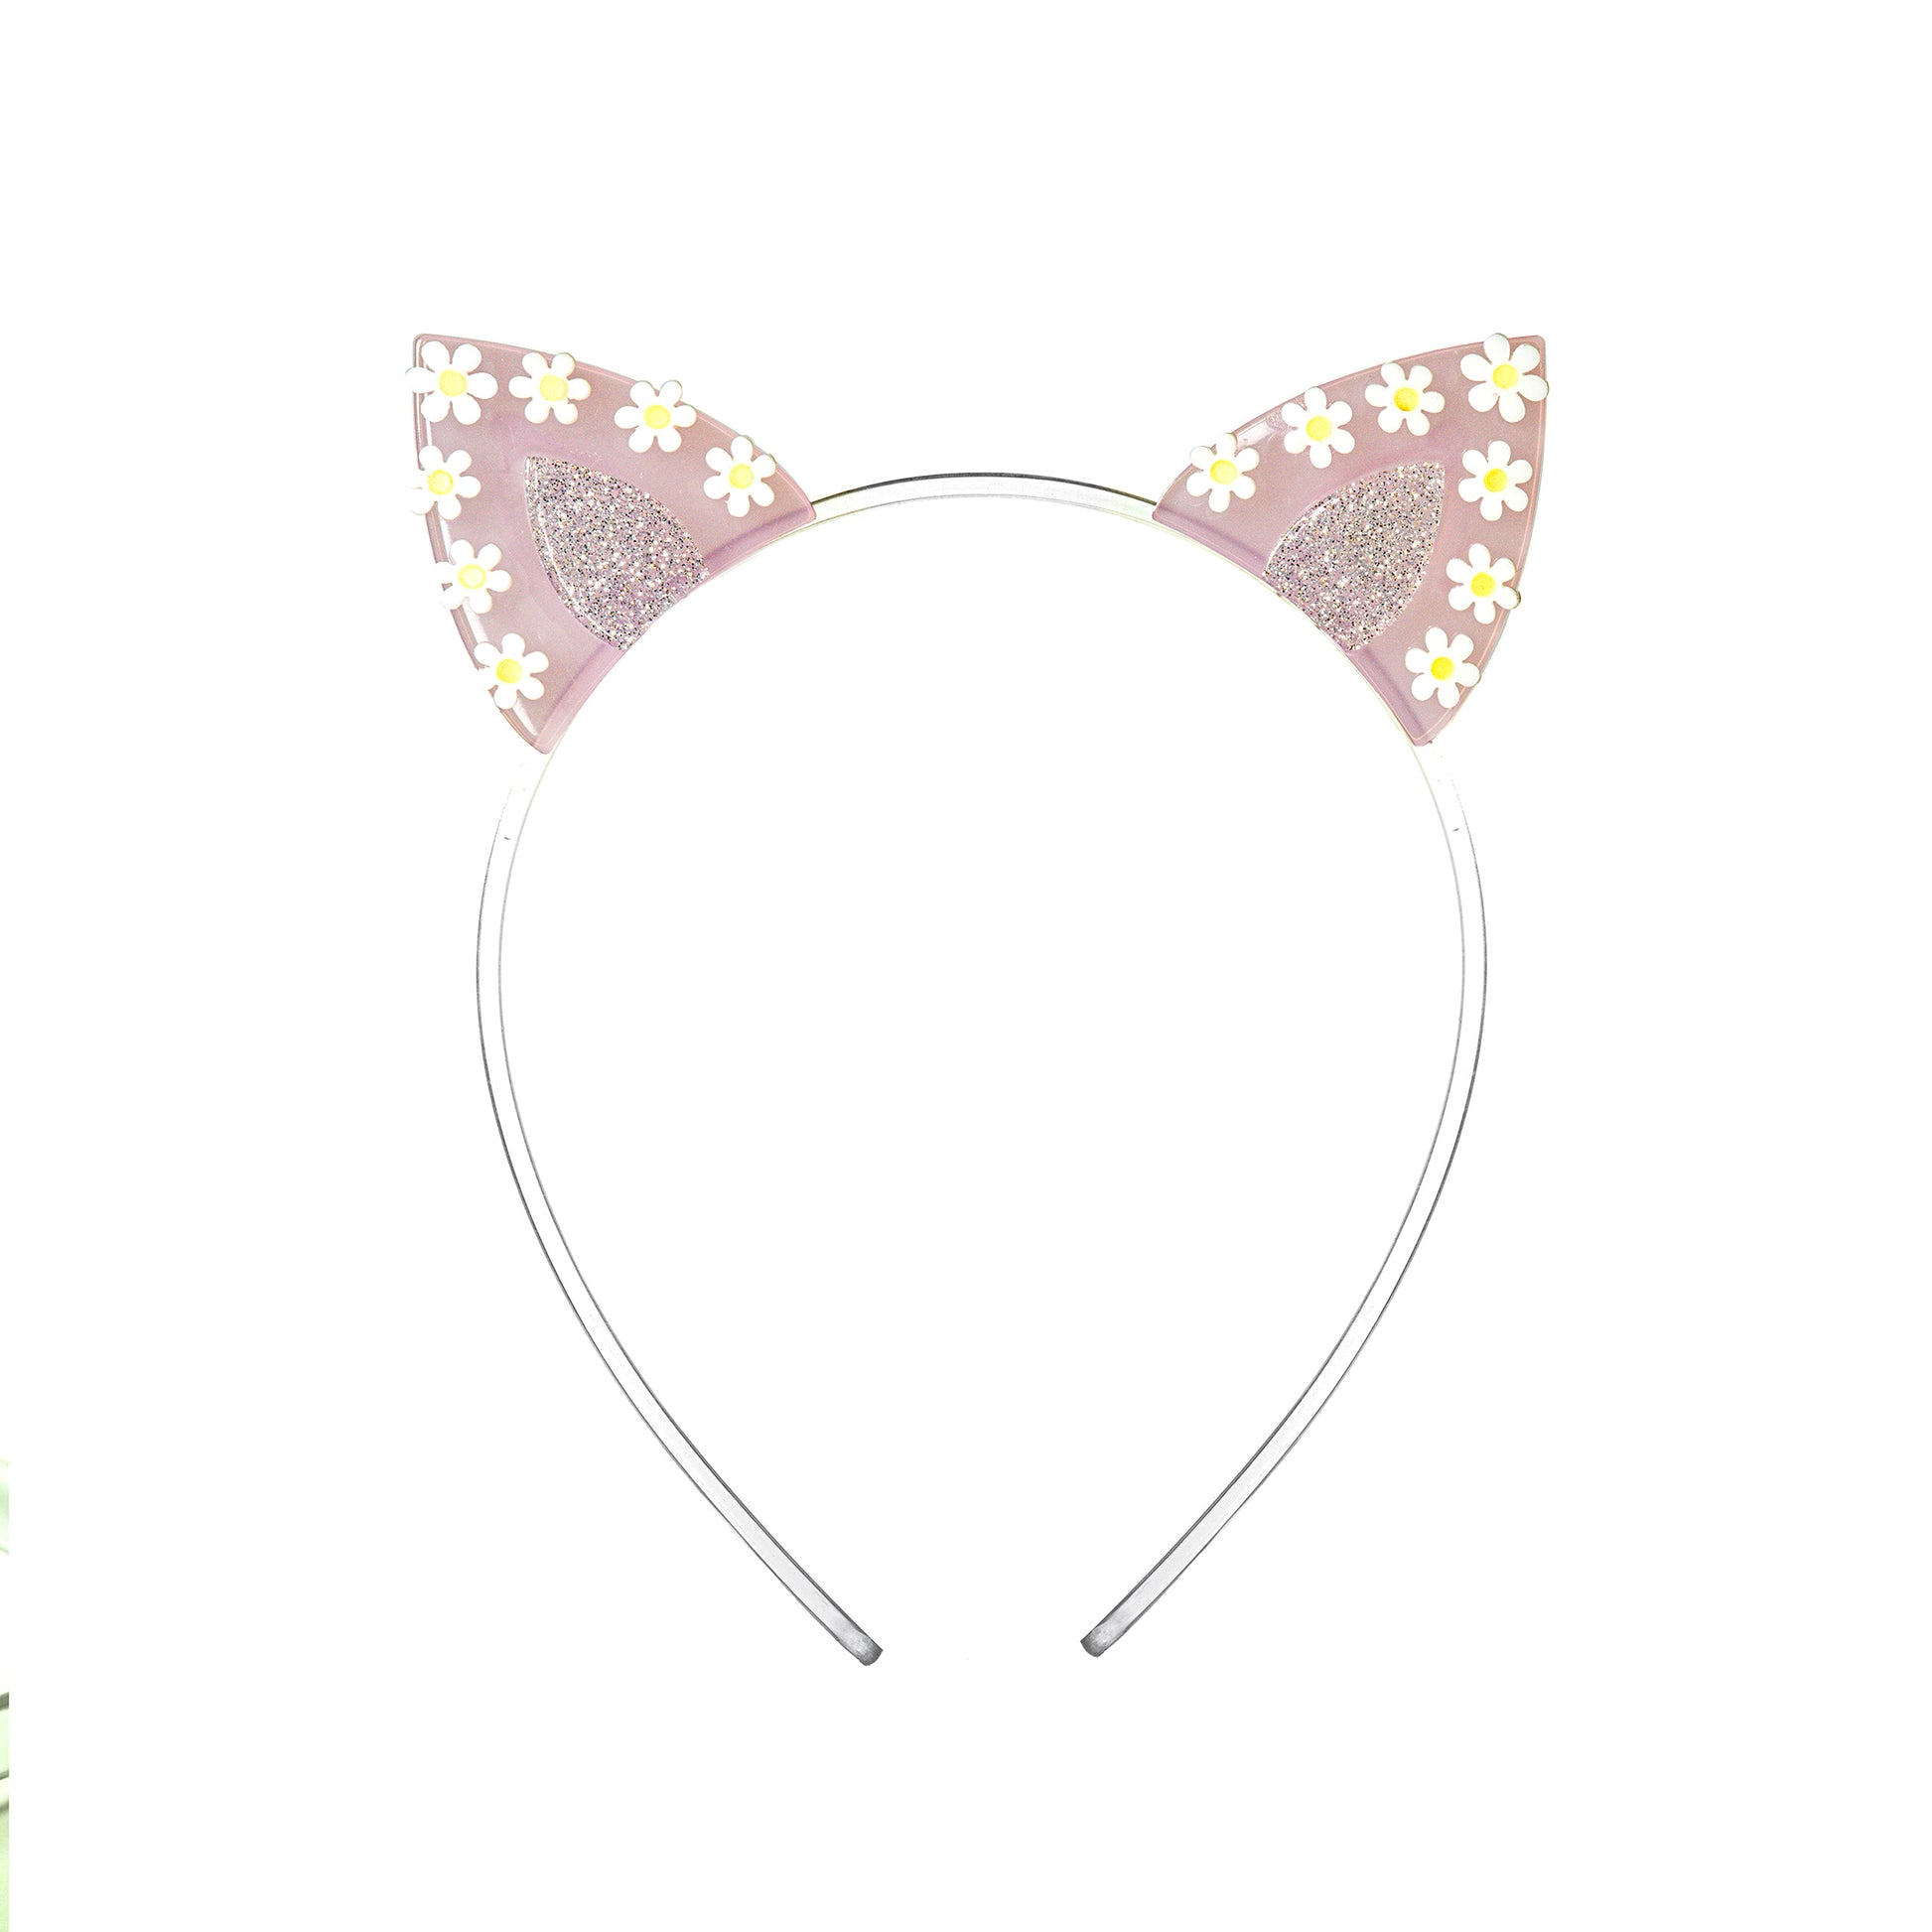 Clear headband adorned with two bunny ears. Bunny ears are pink and gold, adorned with seven daisies on each.